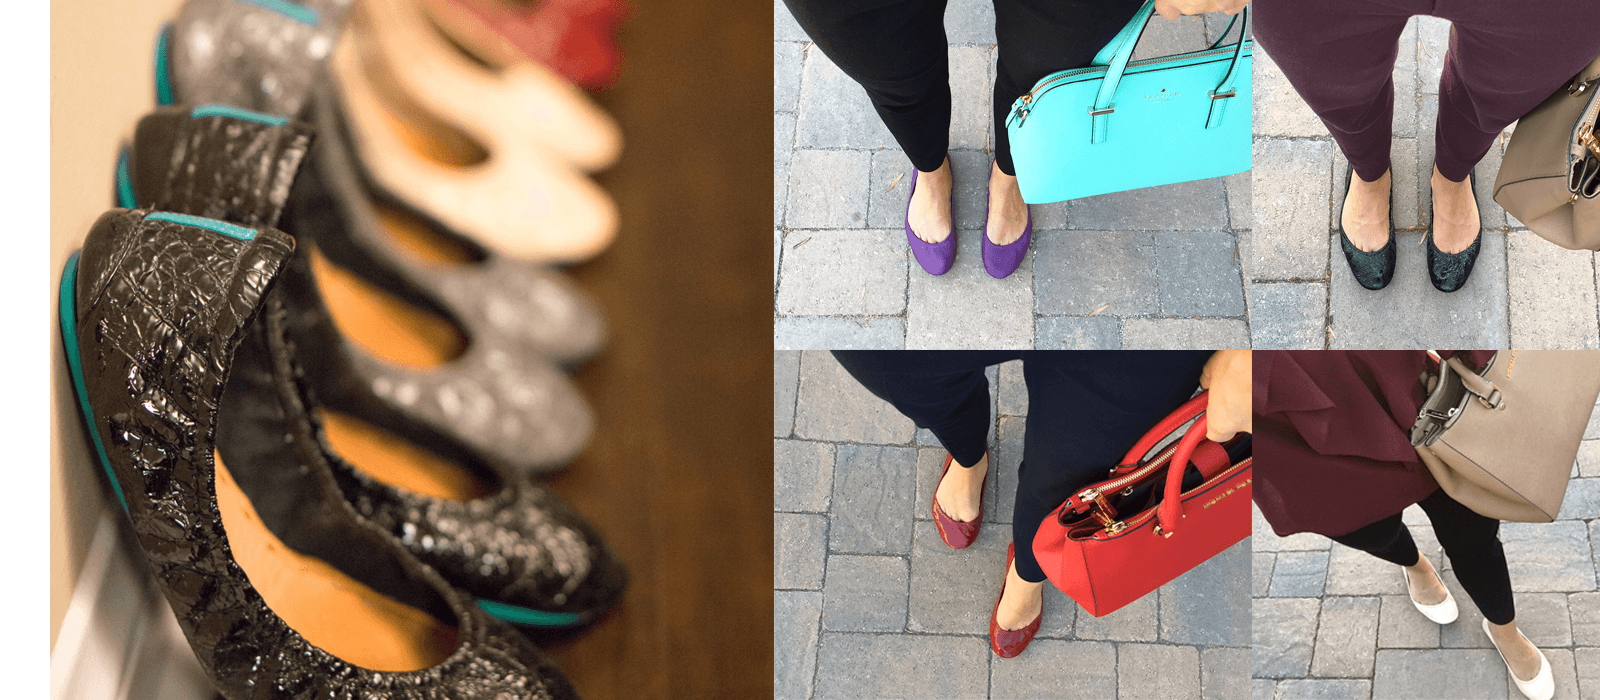 Tieks Ballet Flats Review | Honest Tieks Review | Ultimate Tieks Review | Are Tieks worth the price? | Are Tieks comfortable? | Do Tieks last? | Should I purchase patent or classic leather Tieks? | All your questions answered here. Best ballet flats for busy professionals. Click to read more! 